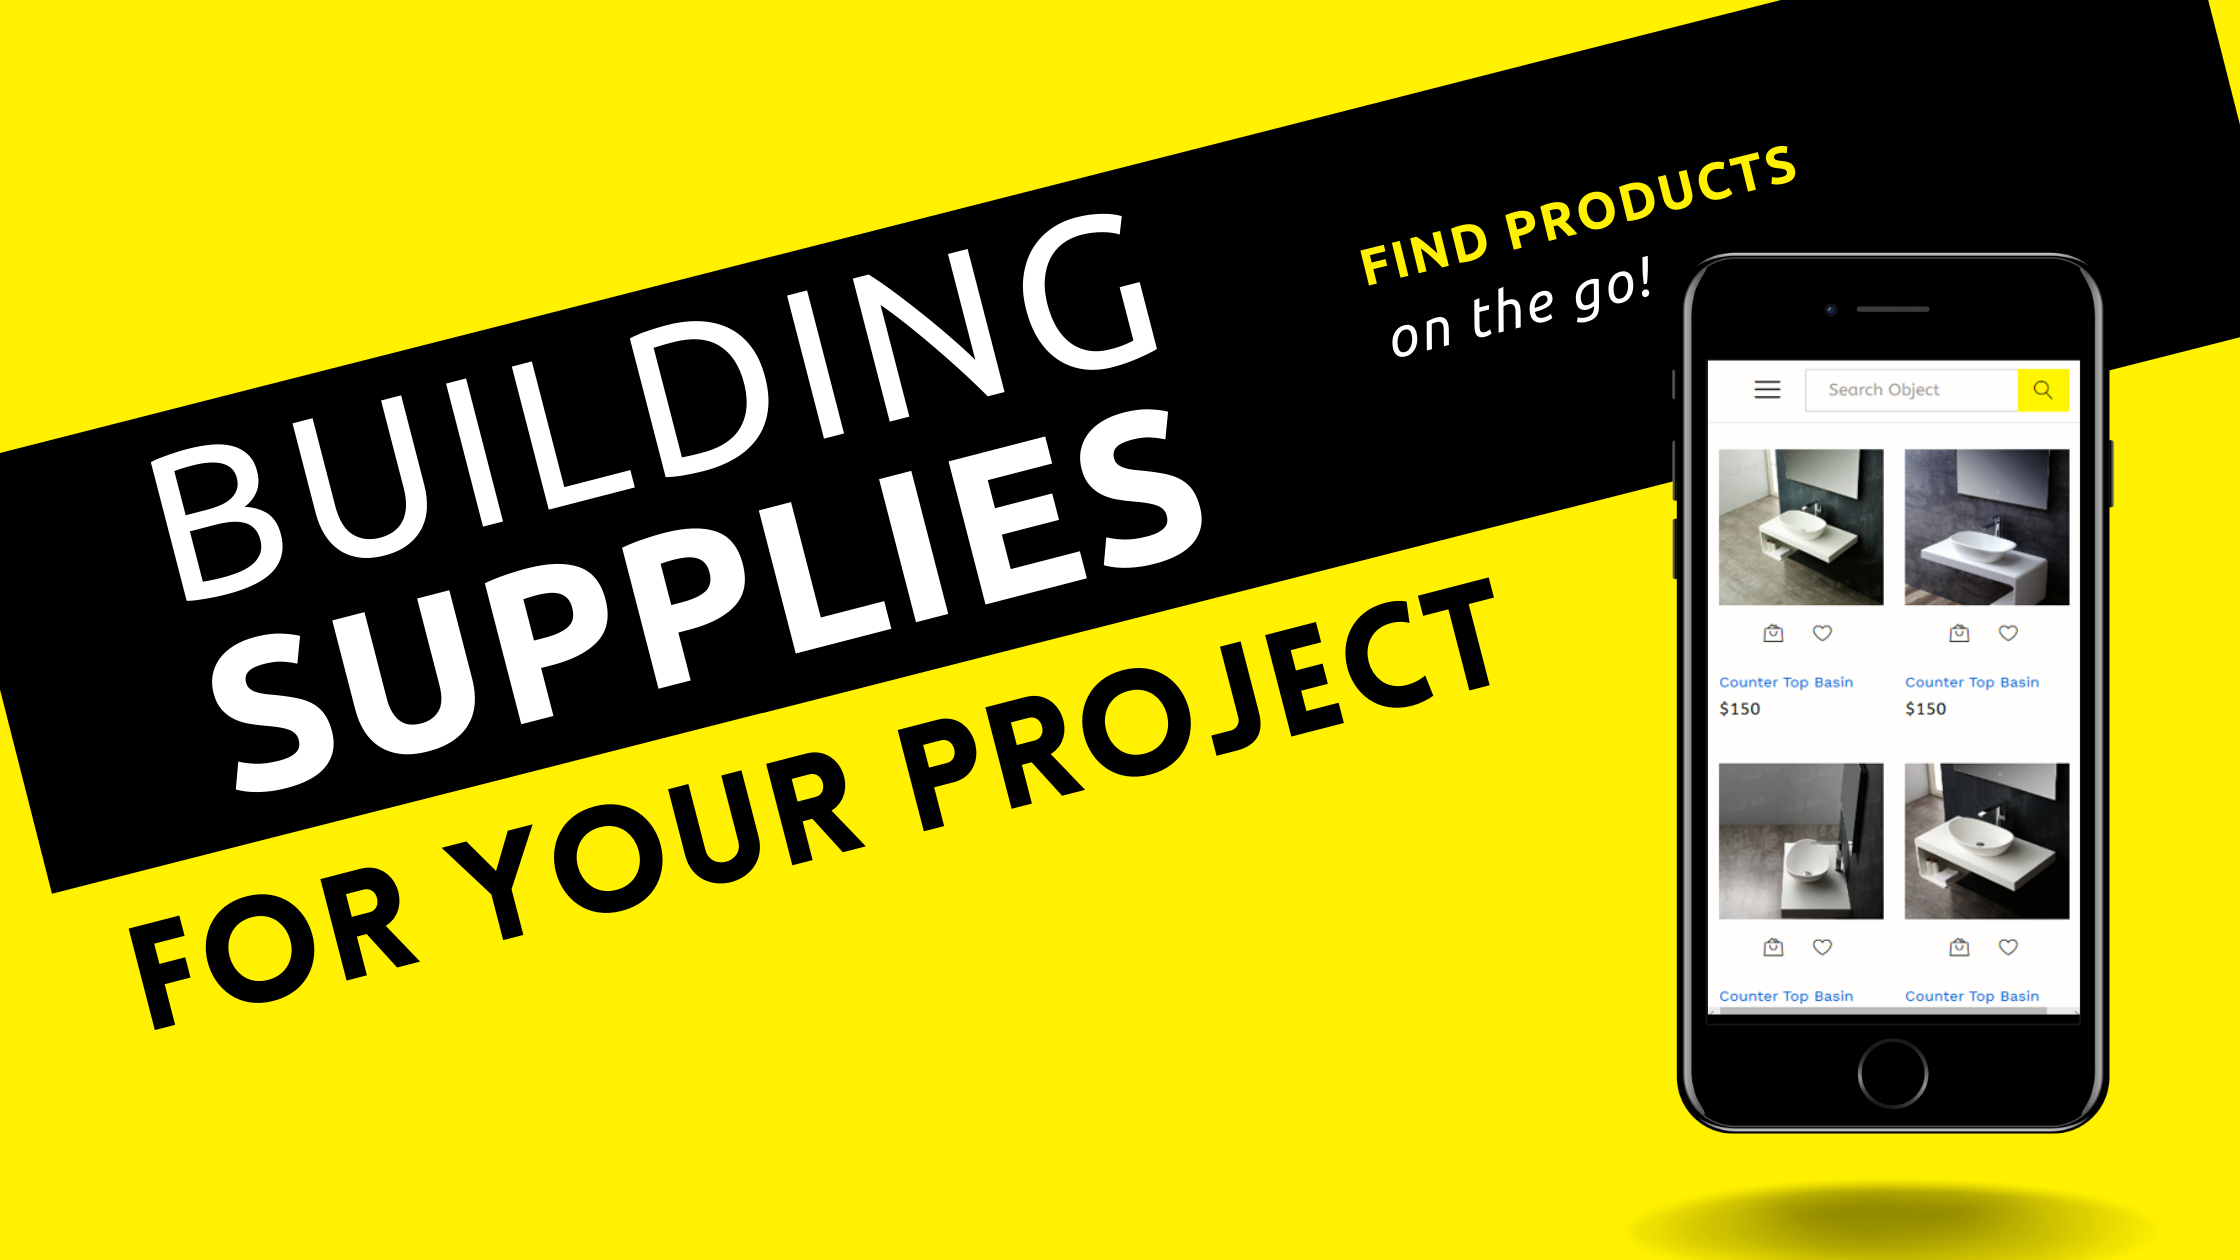 the Blea Store - Building Suppliers For Your Project | Find products on the go!